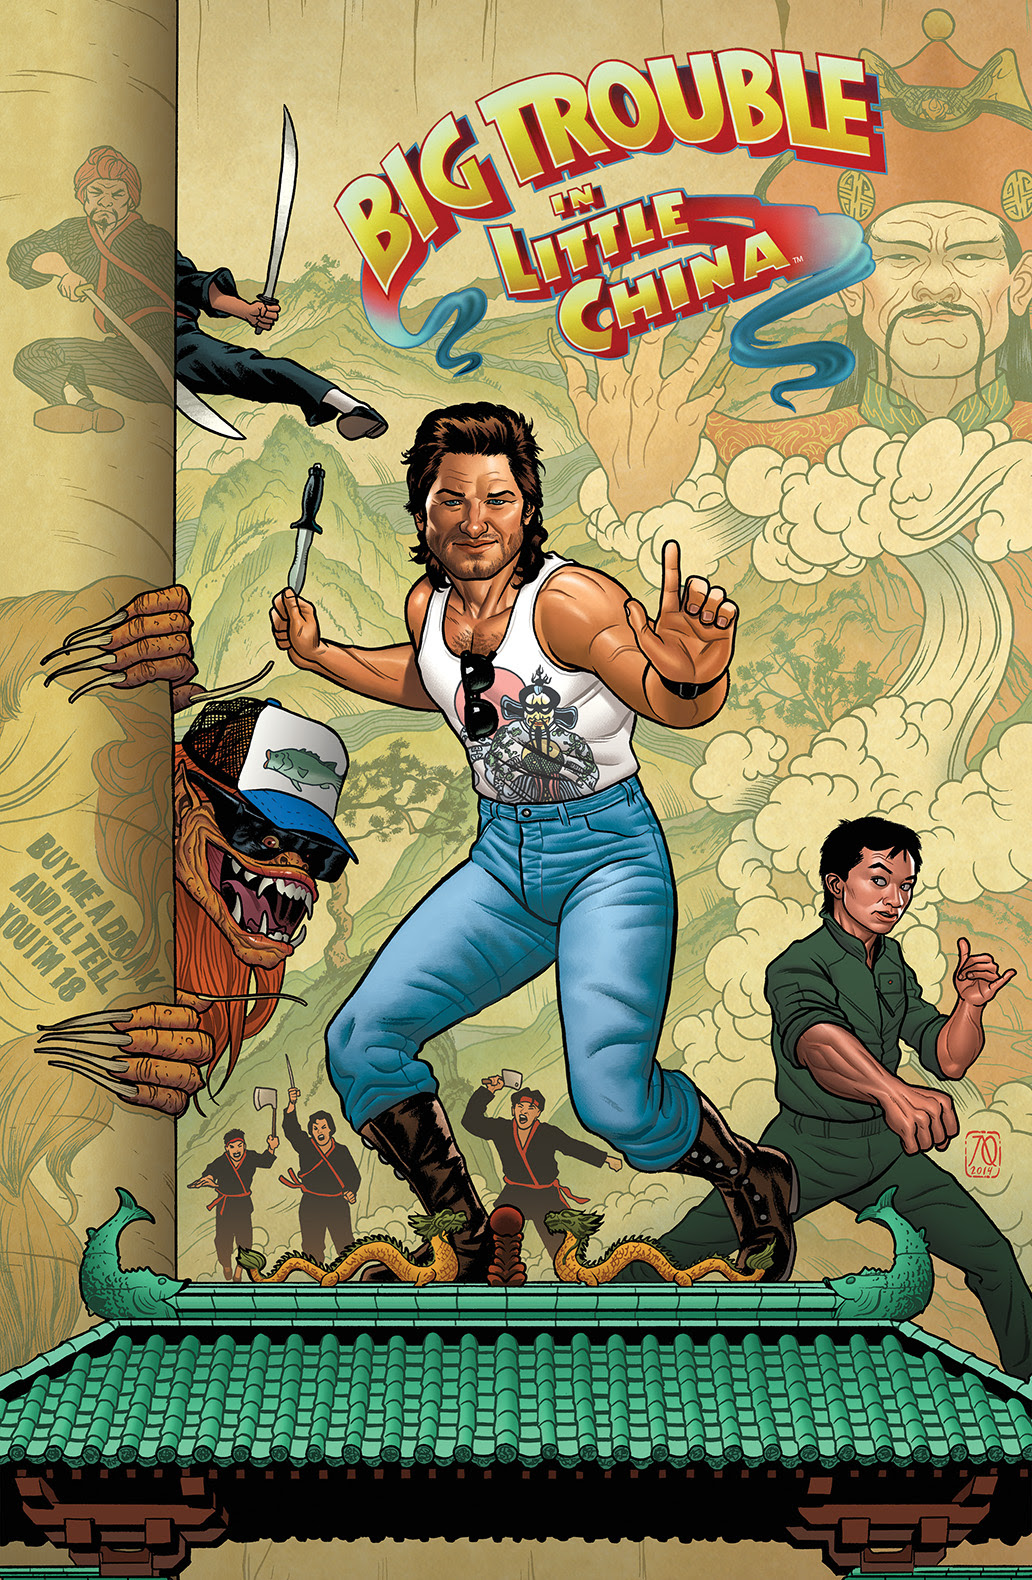 BIG TROUBLE IN LITTLE CHINA #1 Cover B by Joe Quinones